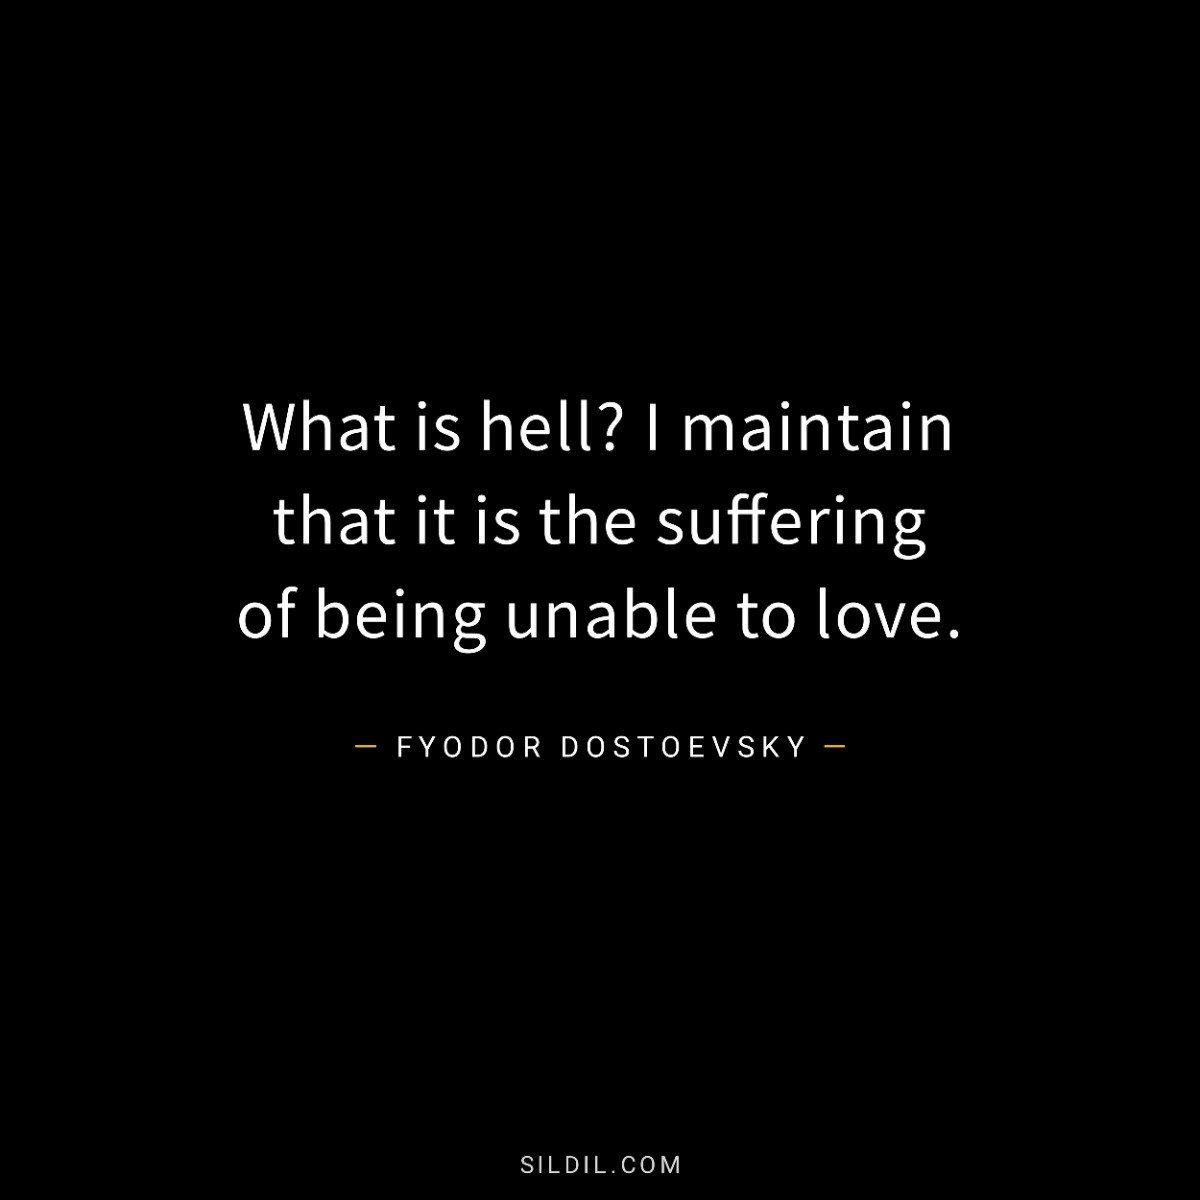 What is hell? I maintain that it is the suffering of being unable to love.